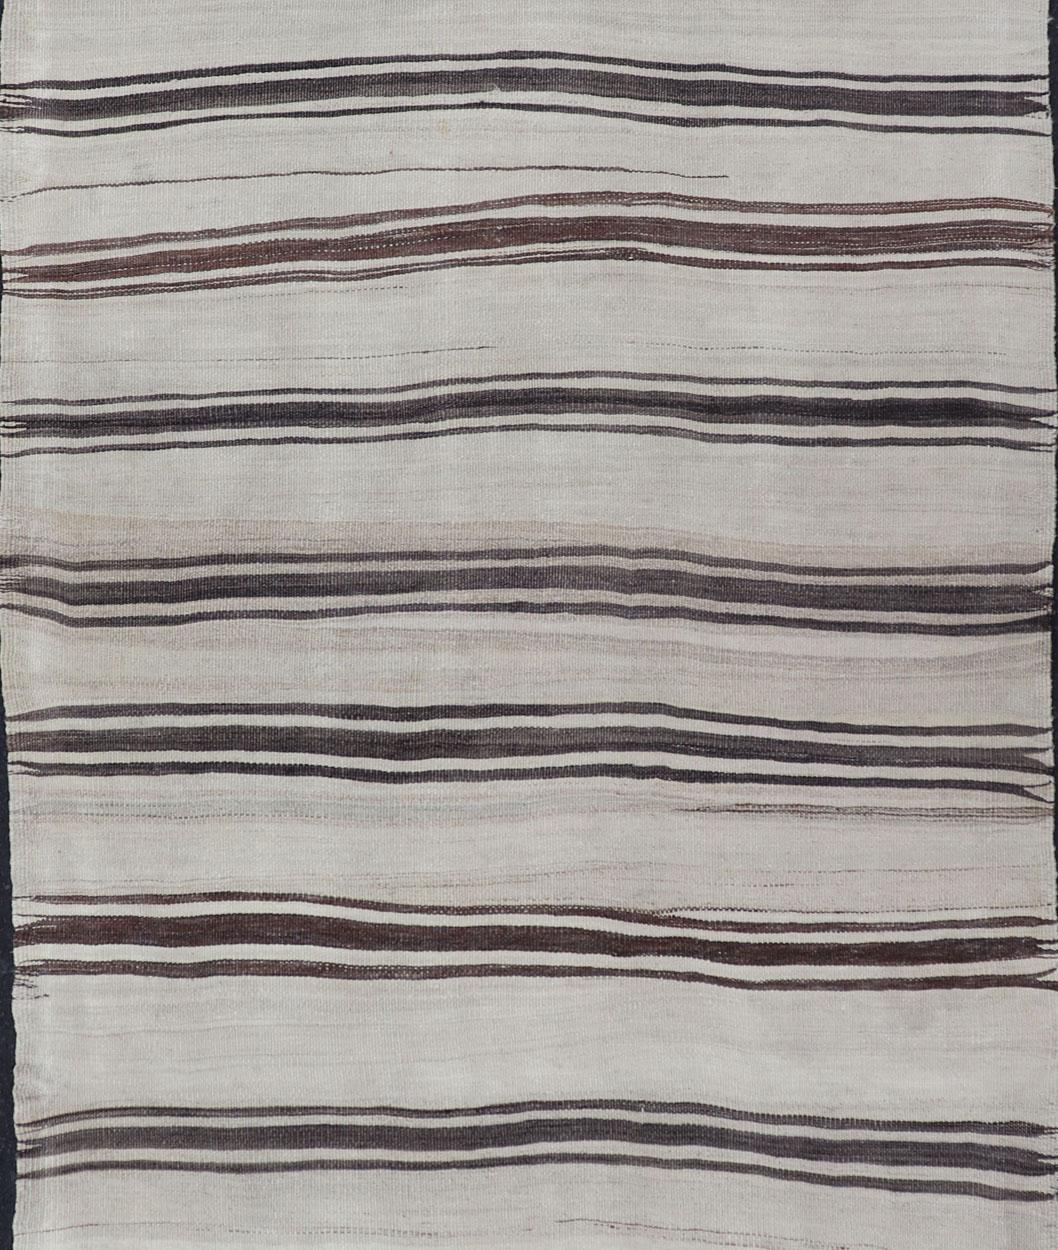 Kilim Turkish Vintage Flat-Weave in Shades of Brown and Ivory with Stripe Design For Sale